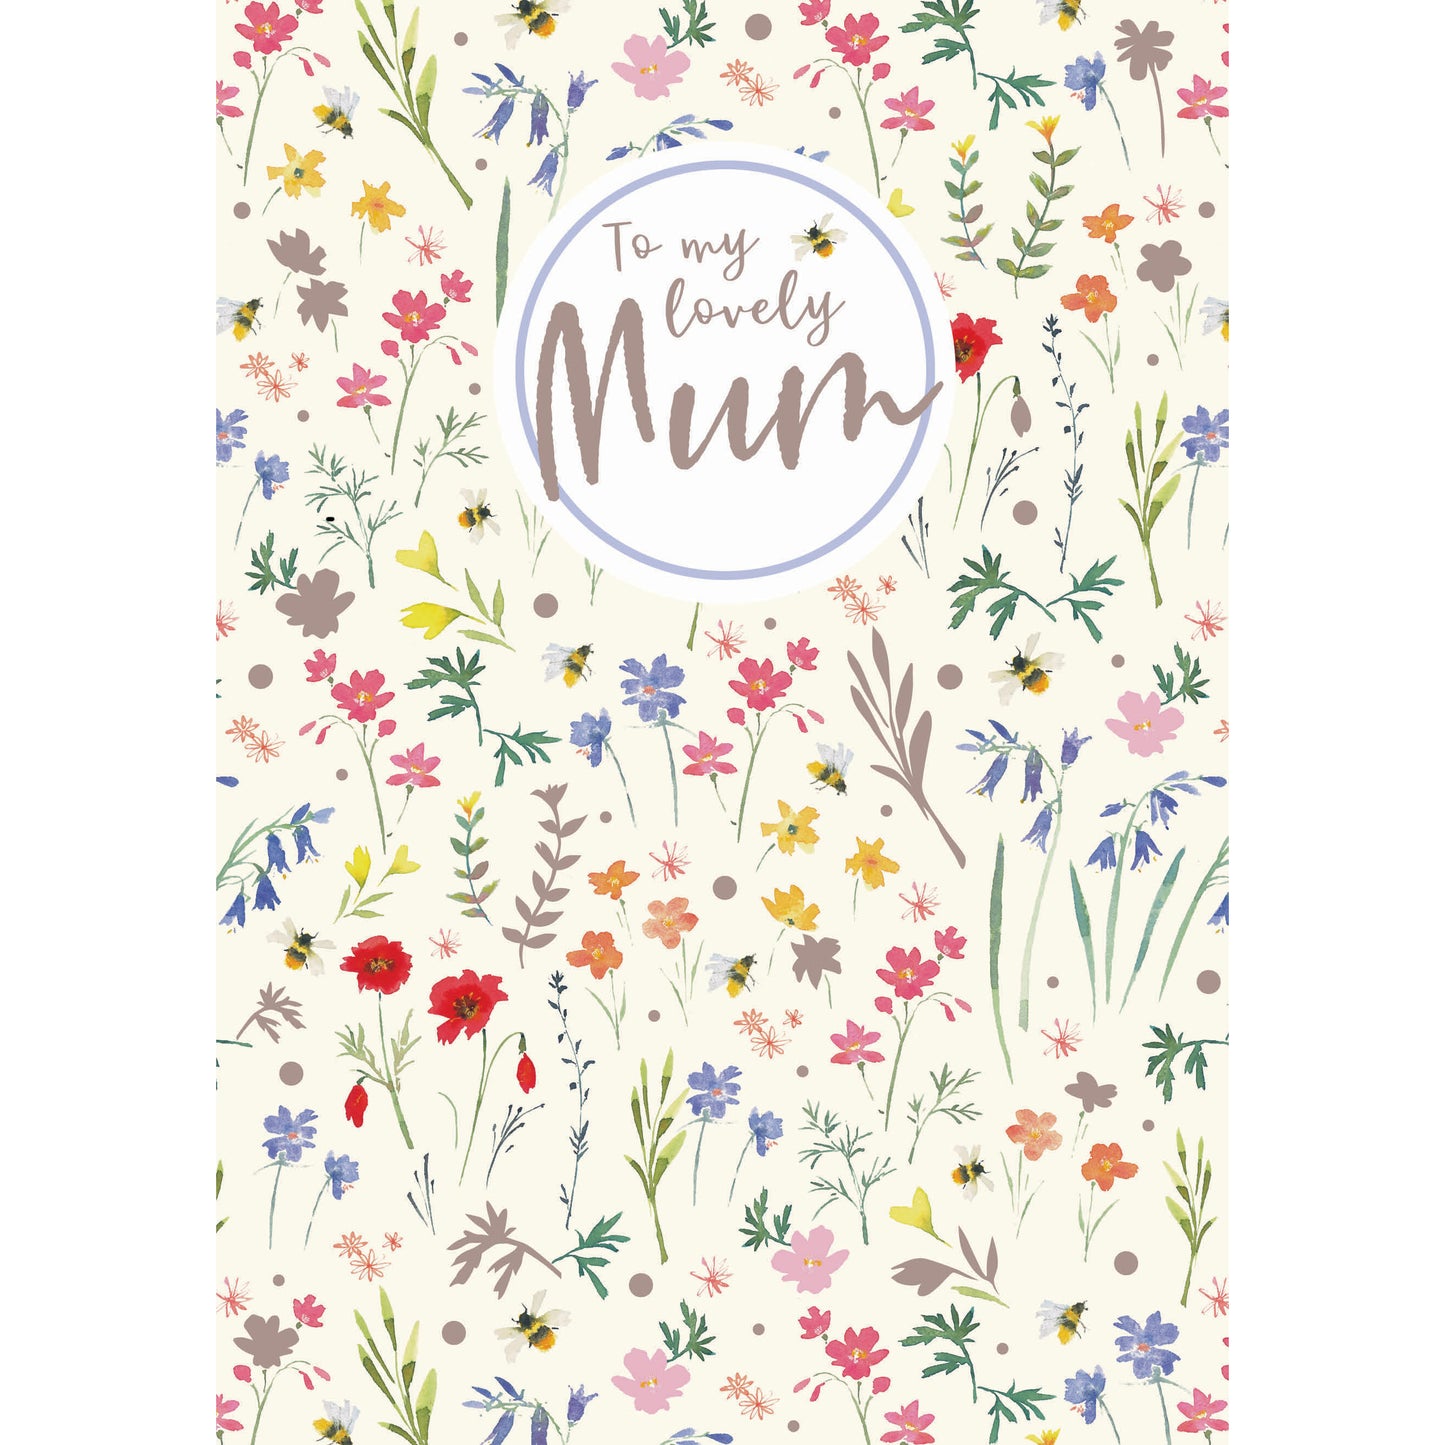 Mother's Day Card - Ditsy Floral